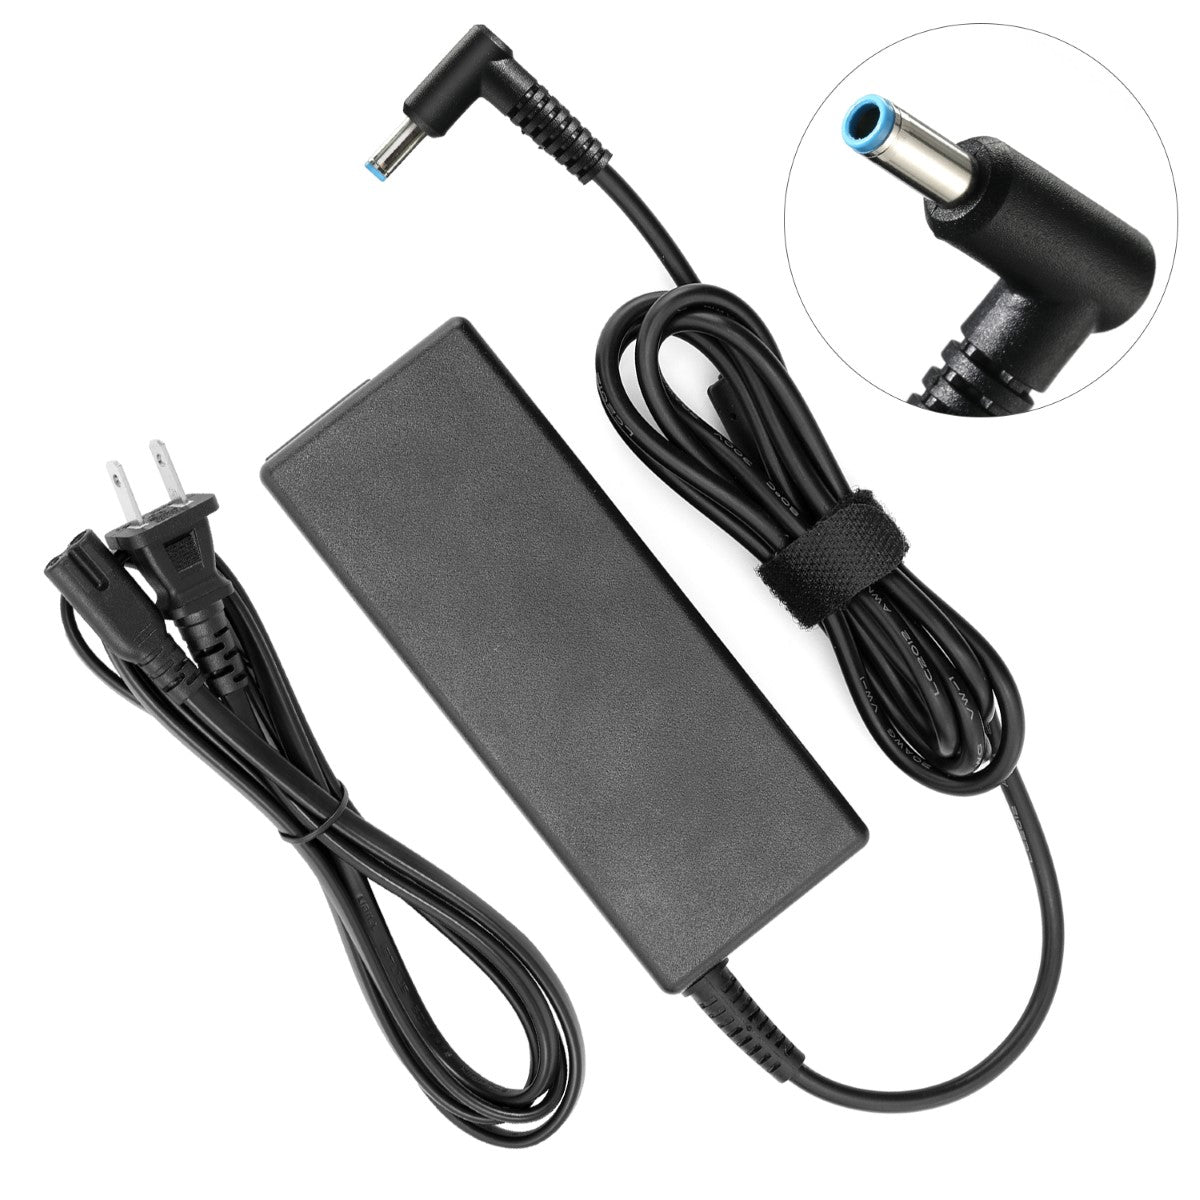 AC Adapter Charger for HP 15-f272wm Notebook.